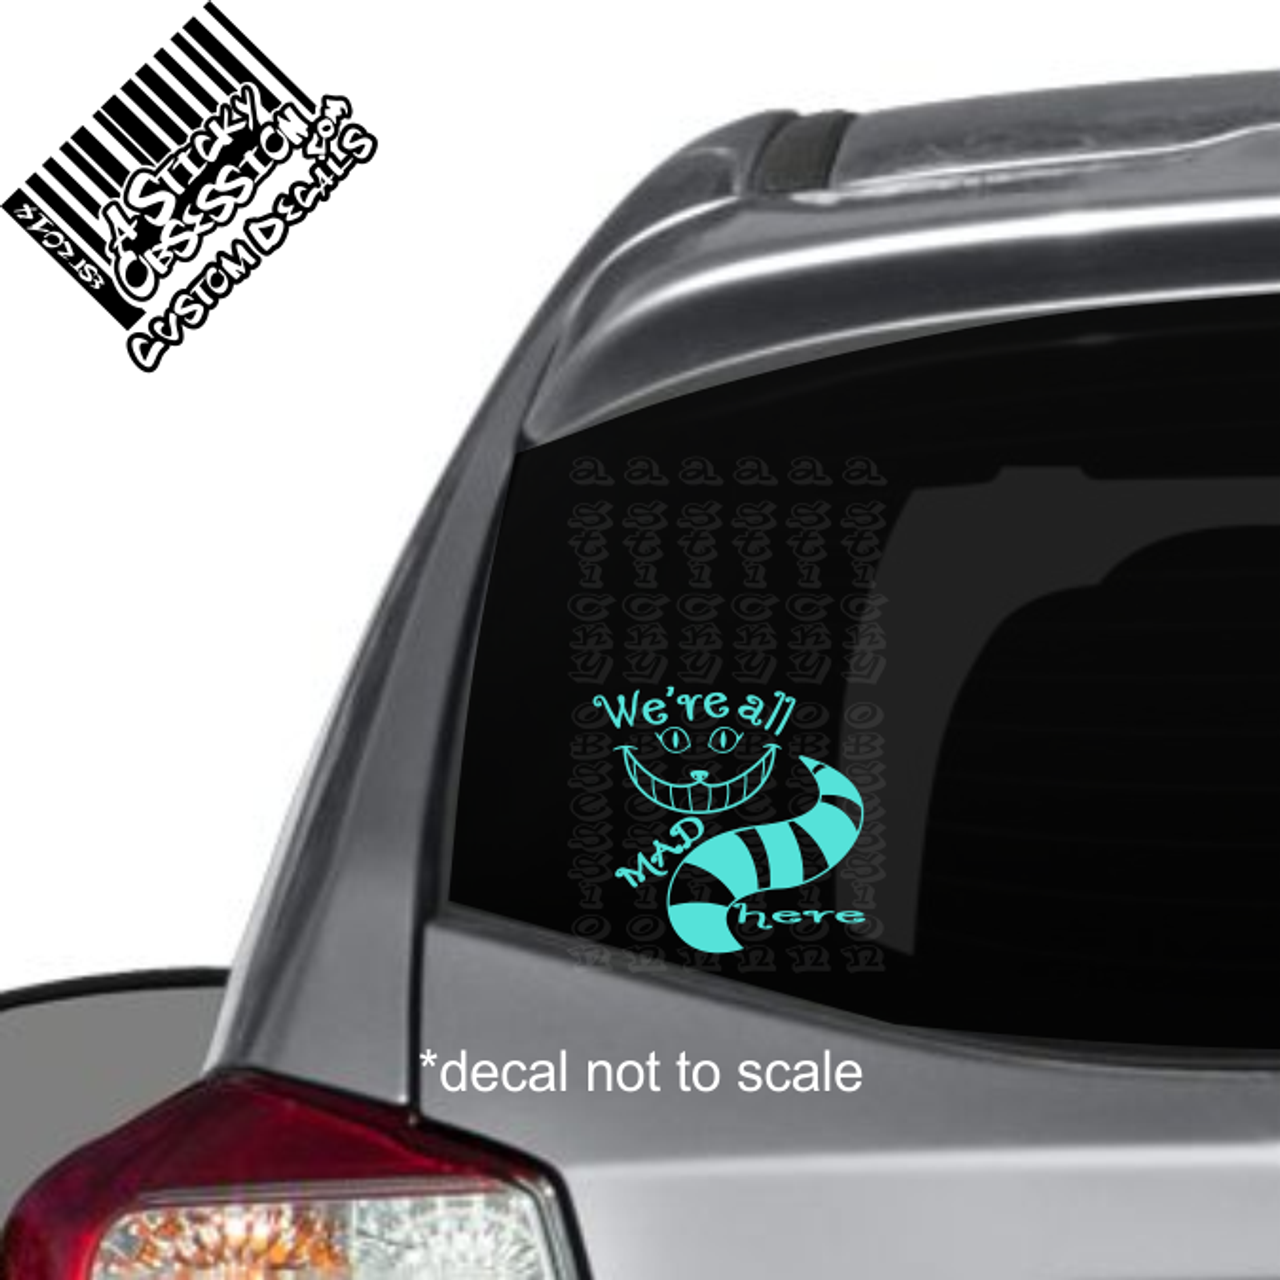 5.5 X 4.75|CGS1122 Chase Grace Studio Were All Mad Here Cheshire Cat Mad Hatter Alice in Wonderland Vinyl Decal Sticker|White|Cars Trucks SUVs Laptops 